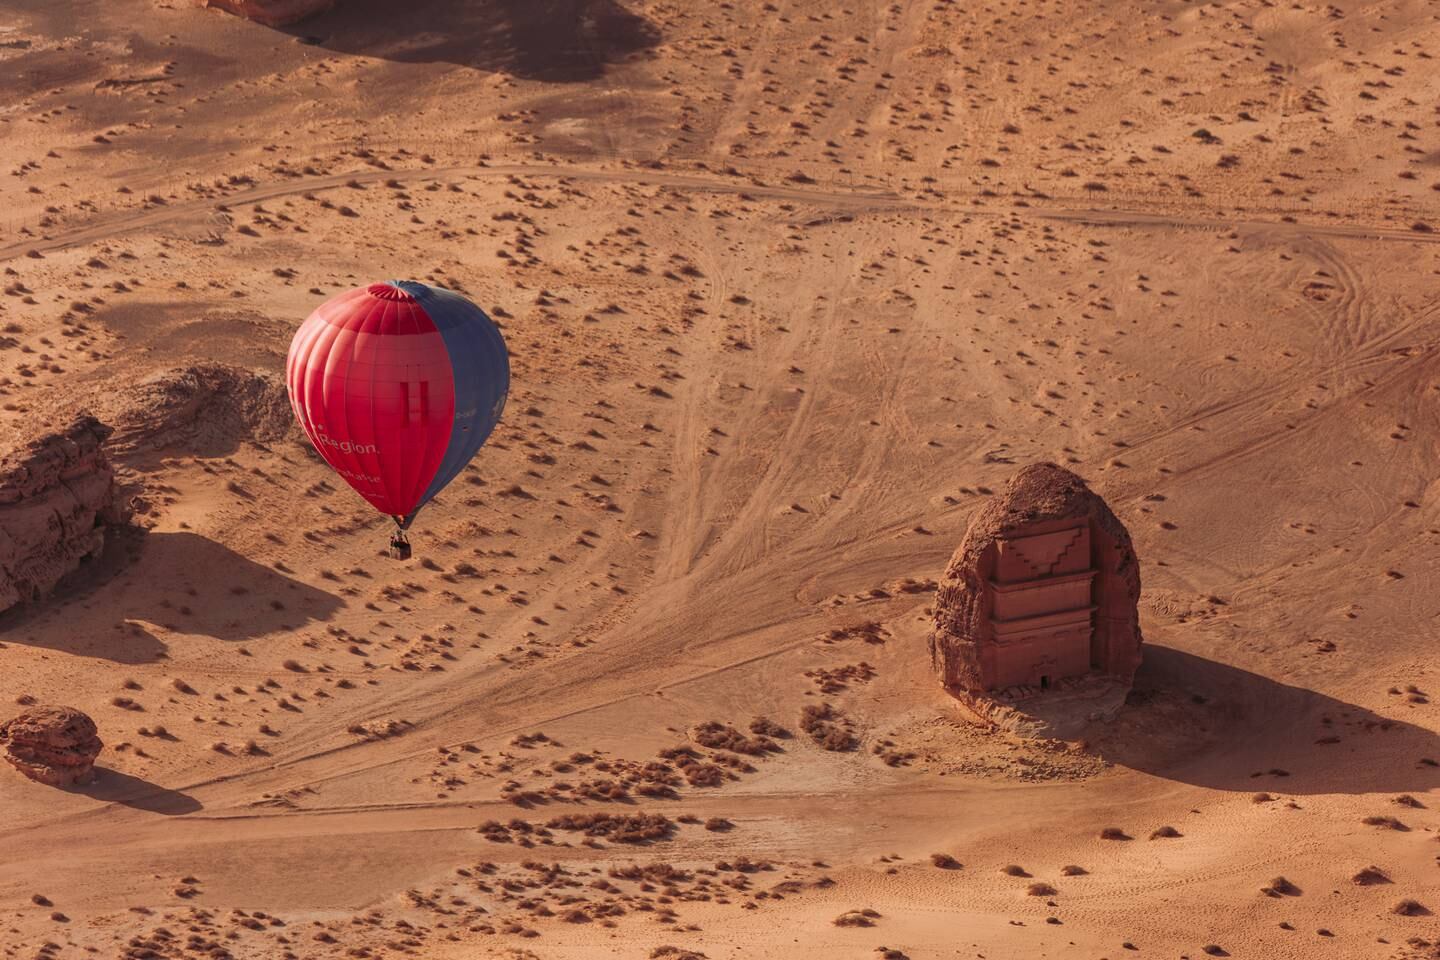 The Guinness World Record for the world’s largest hot air balloon glow show was broken in AlUla, Saudi Arabia on March 1, 2022. Photo: Guinness World Records